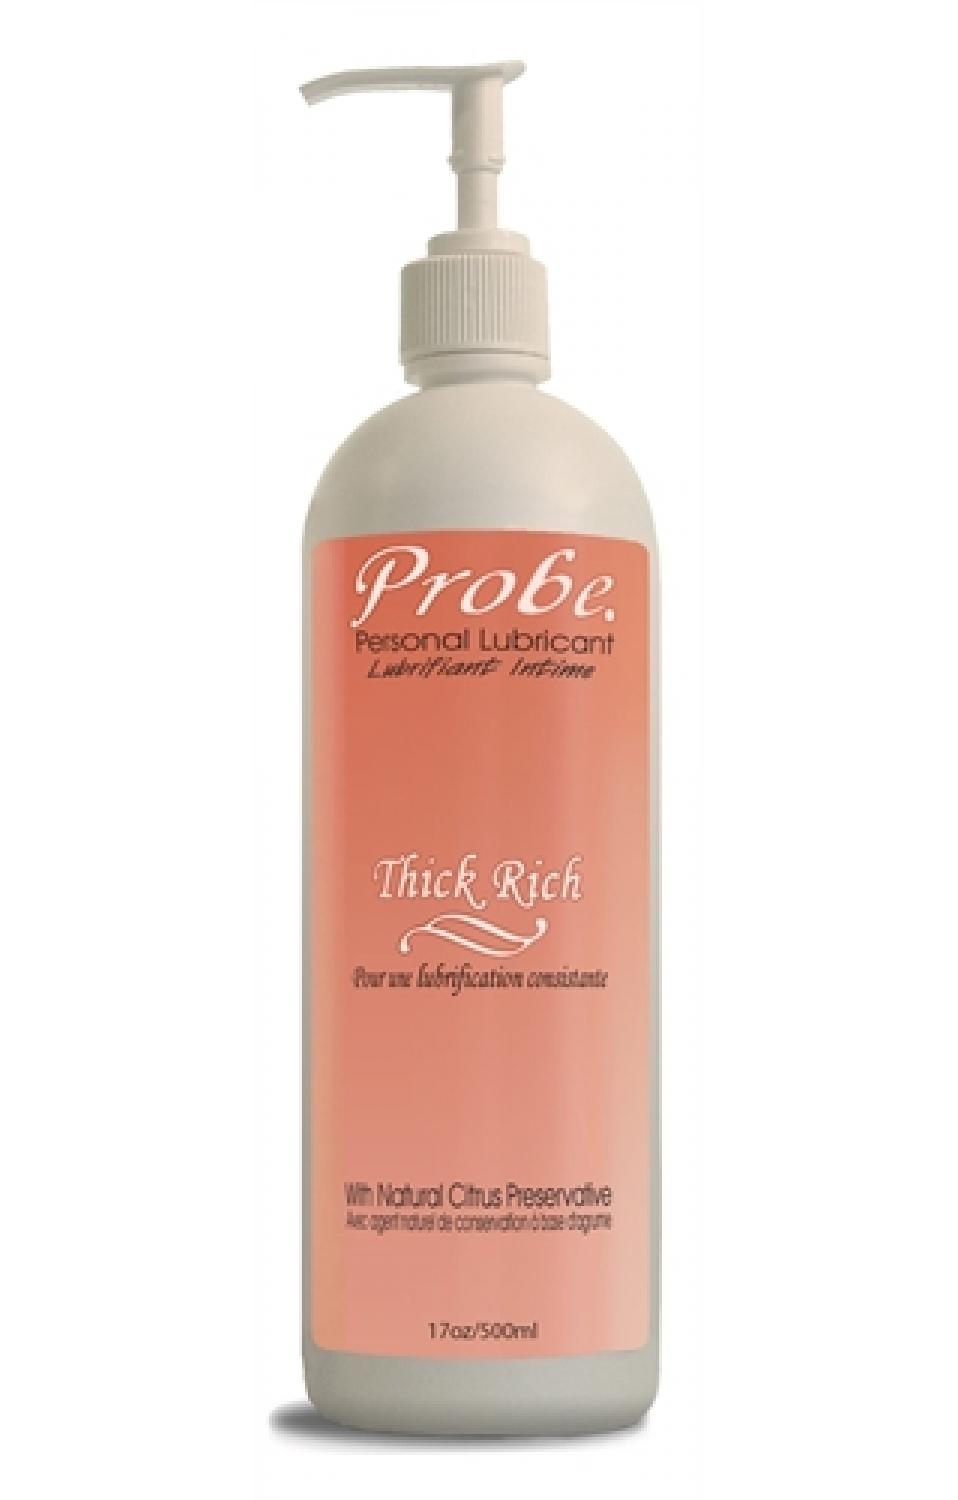 Probe Personal Lube - Thick & Rich 17oz